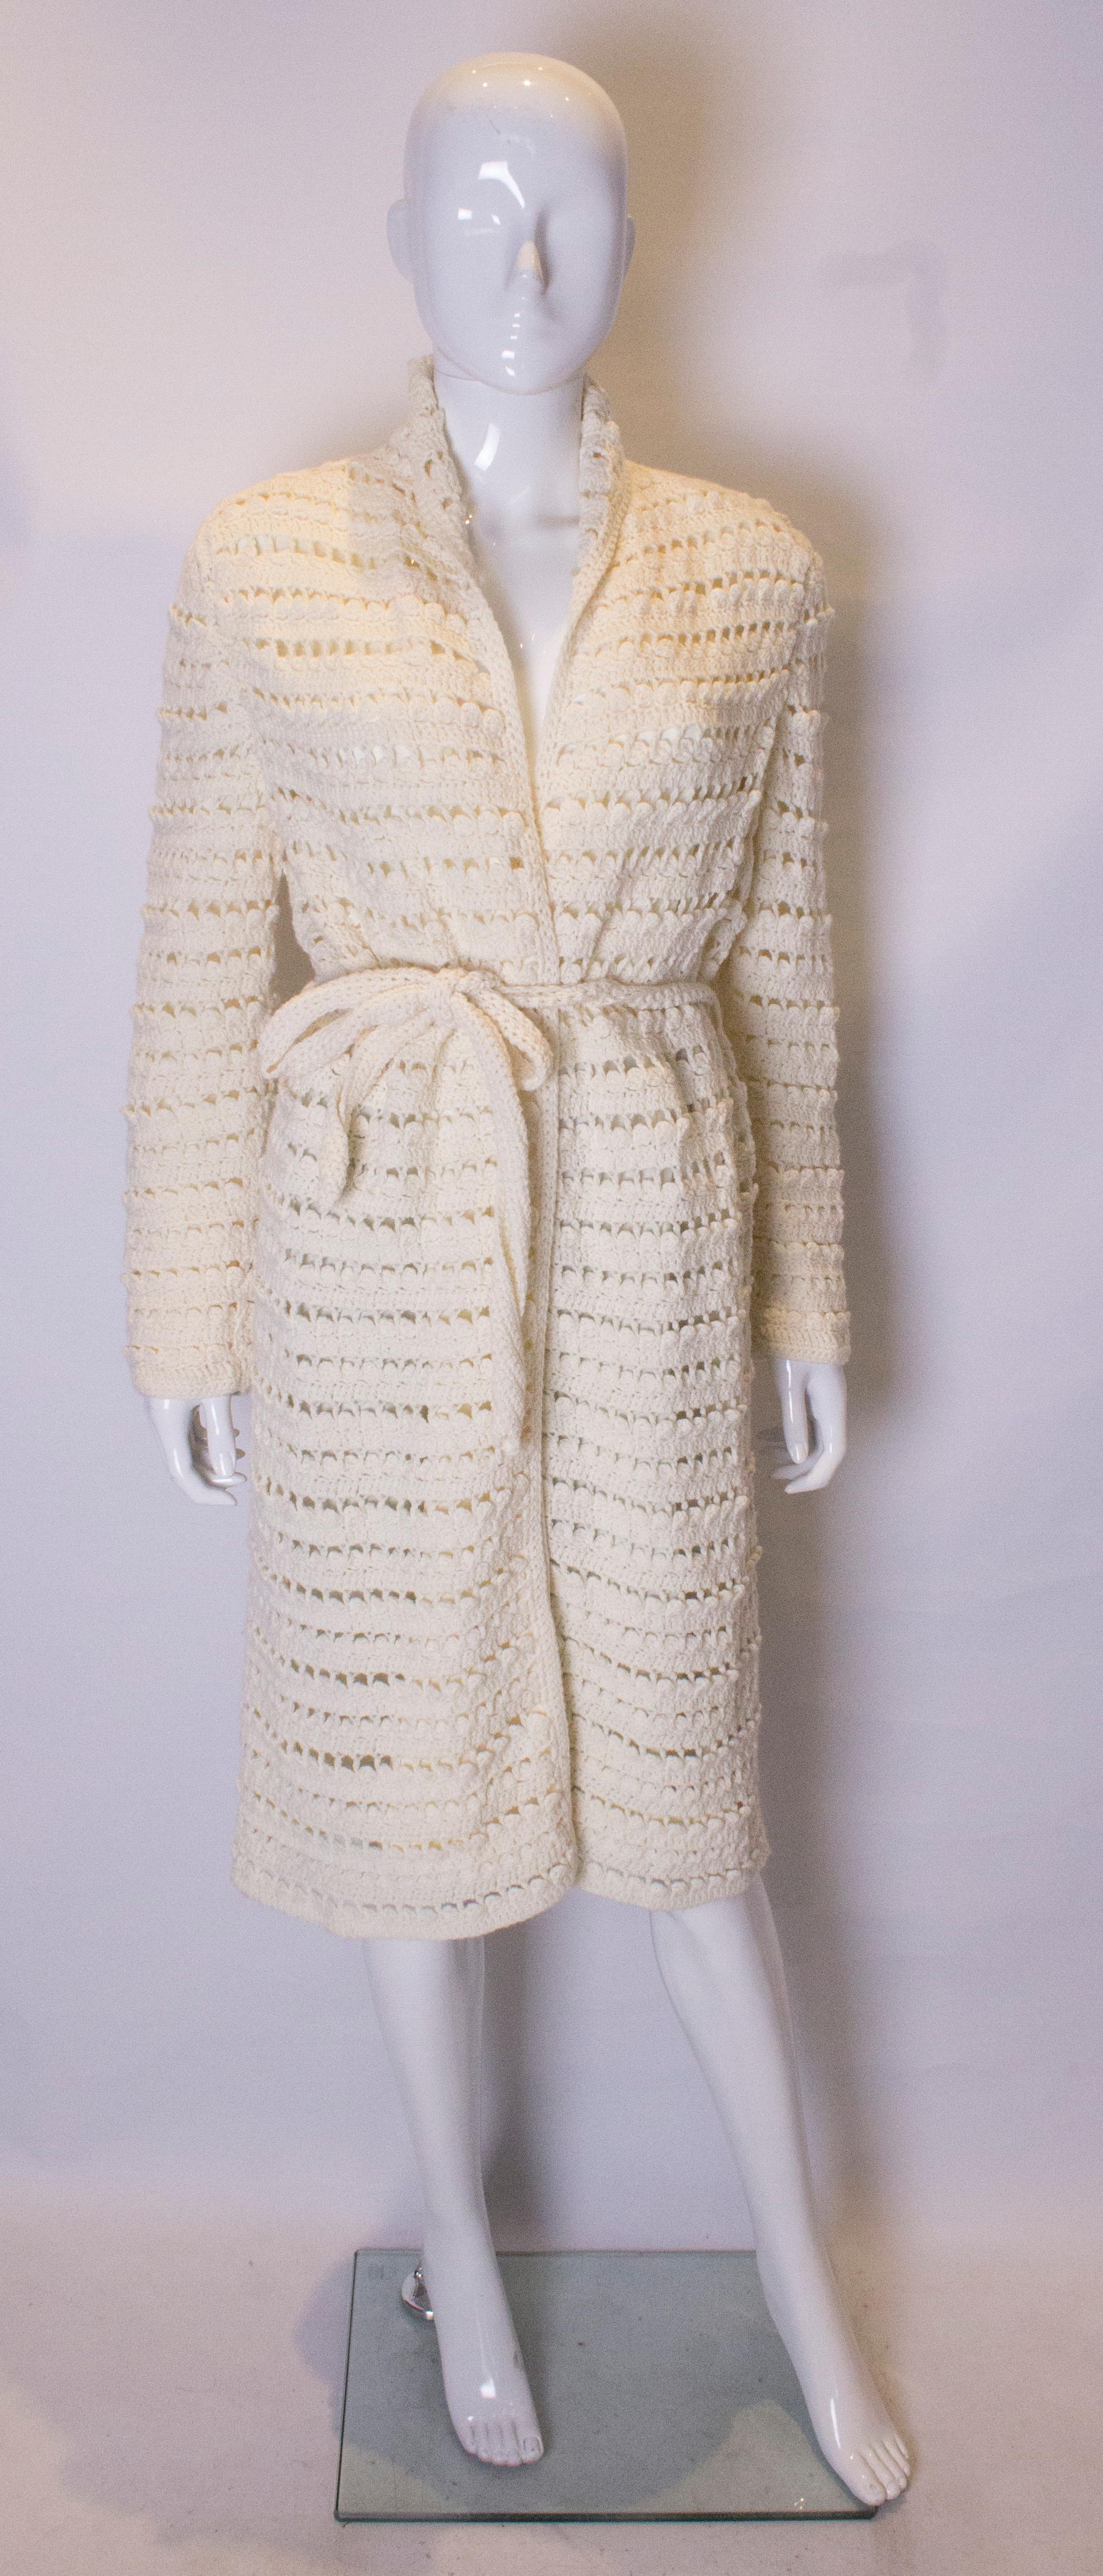 A chic knitted cream coat . The coat has a shawl collar, tie belt and is fully lined.